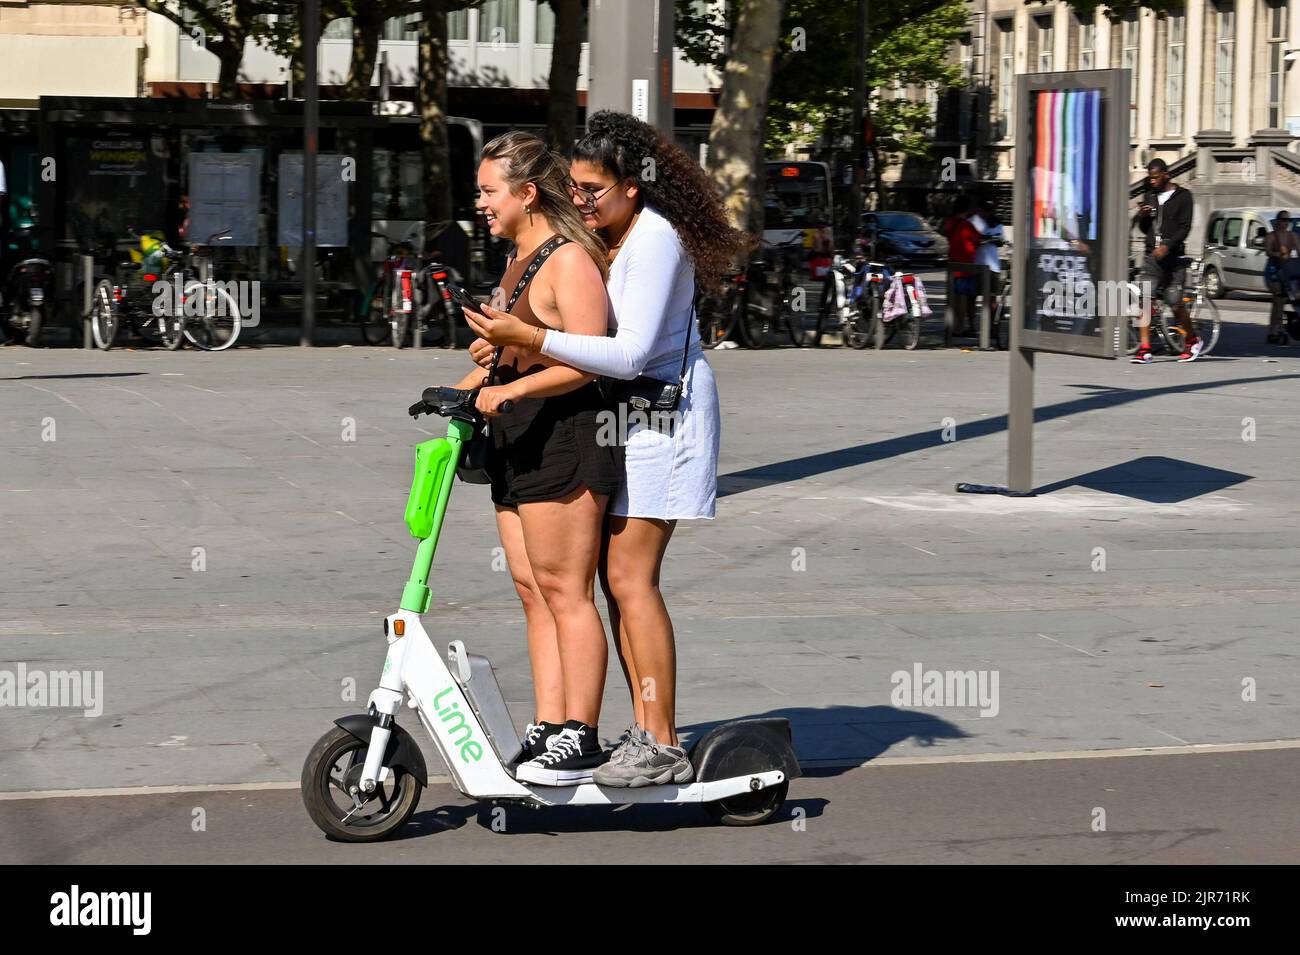 Antwerp, Belgium - August 2022: Two people balancing on an electric scooter in the city centre. One is using a mobile phone while holding on Stock Photo